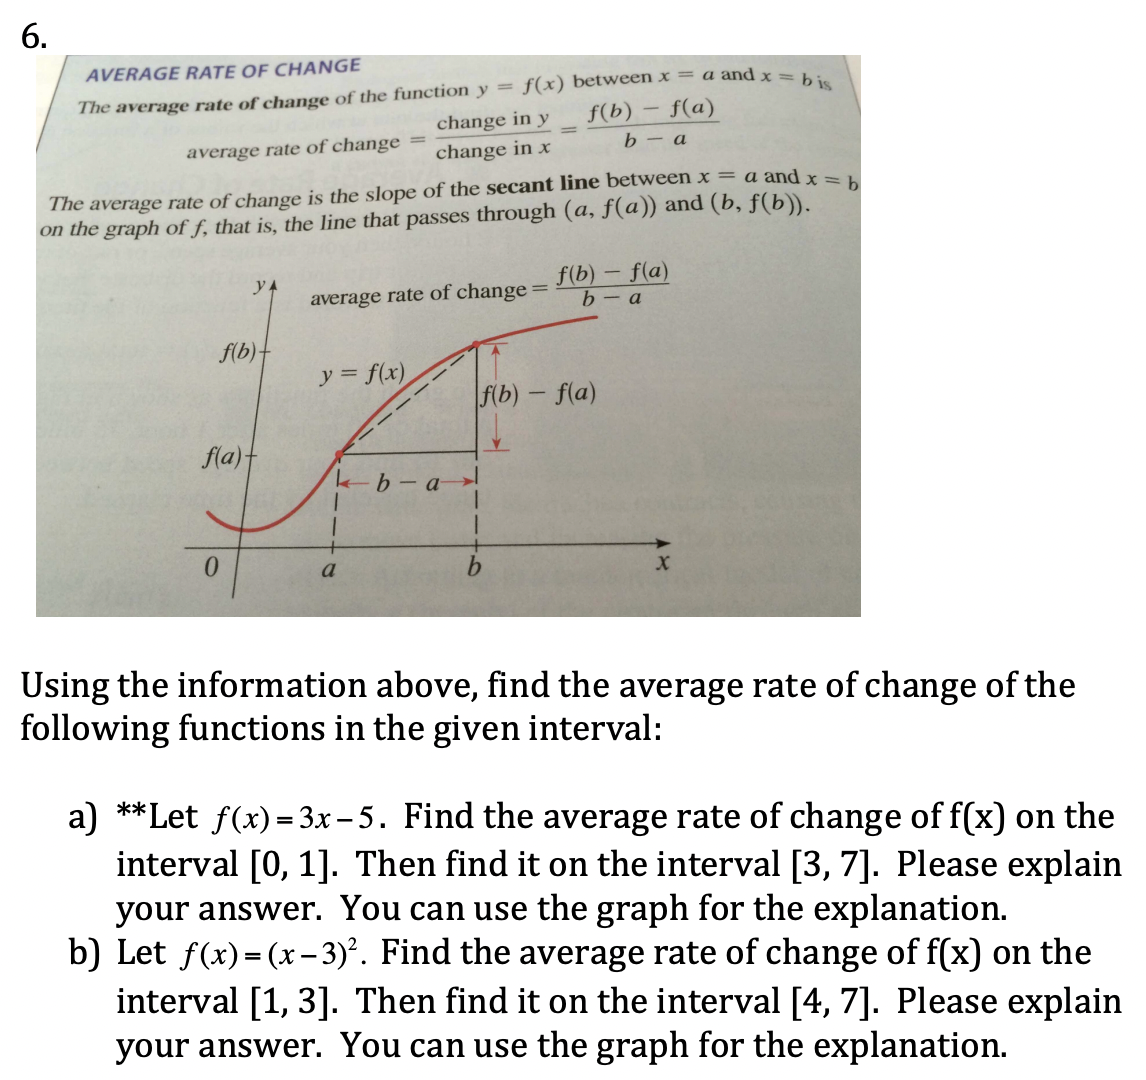 6.
AVERAGE RATE OF CH ANGE
The average rate of change of the function y = f(x) between x = a and x =
change in y
f(b) – f(a)
b – a
average rate of change
change in x
The average rate of change is the slope of the secant line between x = a and x = 1
on the graph of f, that is, the line that passes through (a, f(a)) and (b, f(b)).
f(b) – f(a)
b- a
yA
average rate of change
f(b)-
y = f(x)
f(b) - f(a)
fla)t
0.
a
Using the information above, find the average rate of change of the
following functions in the given interval:
a) **Let f(x)= 3x – 5. Find the average rate of change of f(x) on the
interval [0, 1]. Then find it on the interval [3, 7]. Please explain
your answer. You can use the graph for the explanation.
b) Let f(x)=(x – 3)². Find the average rate of change of f(x) on the
interval [1, 3]. Then find it on the interval [4, 7]. Please explain
your answer. You can use the graph for the explanation.
